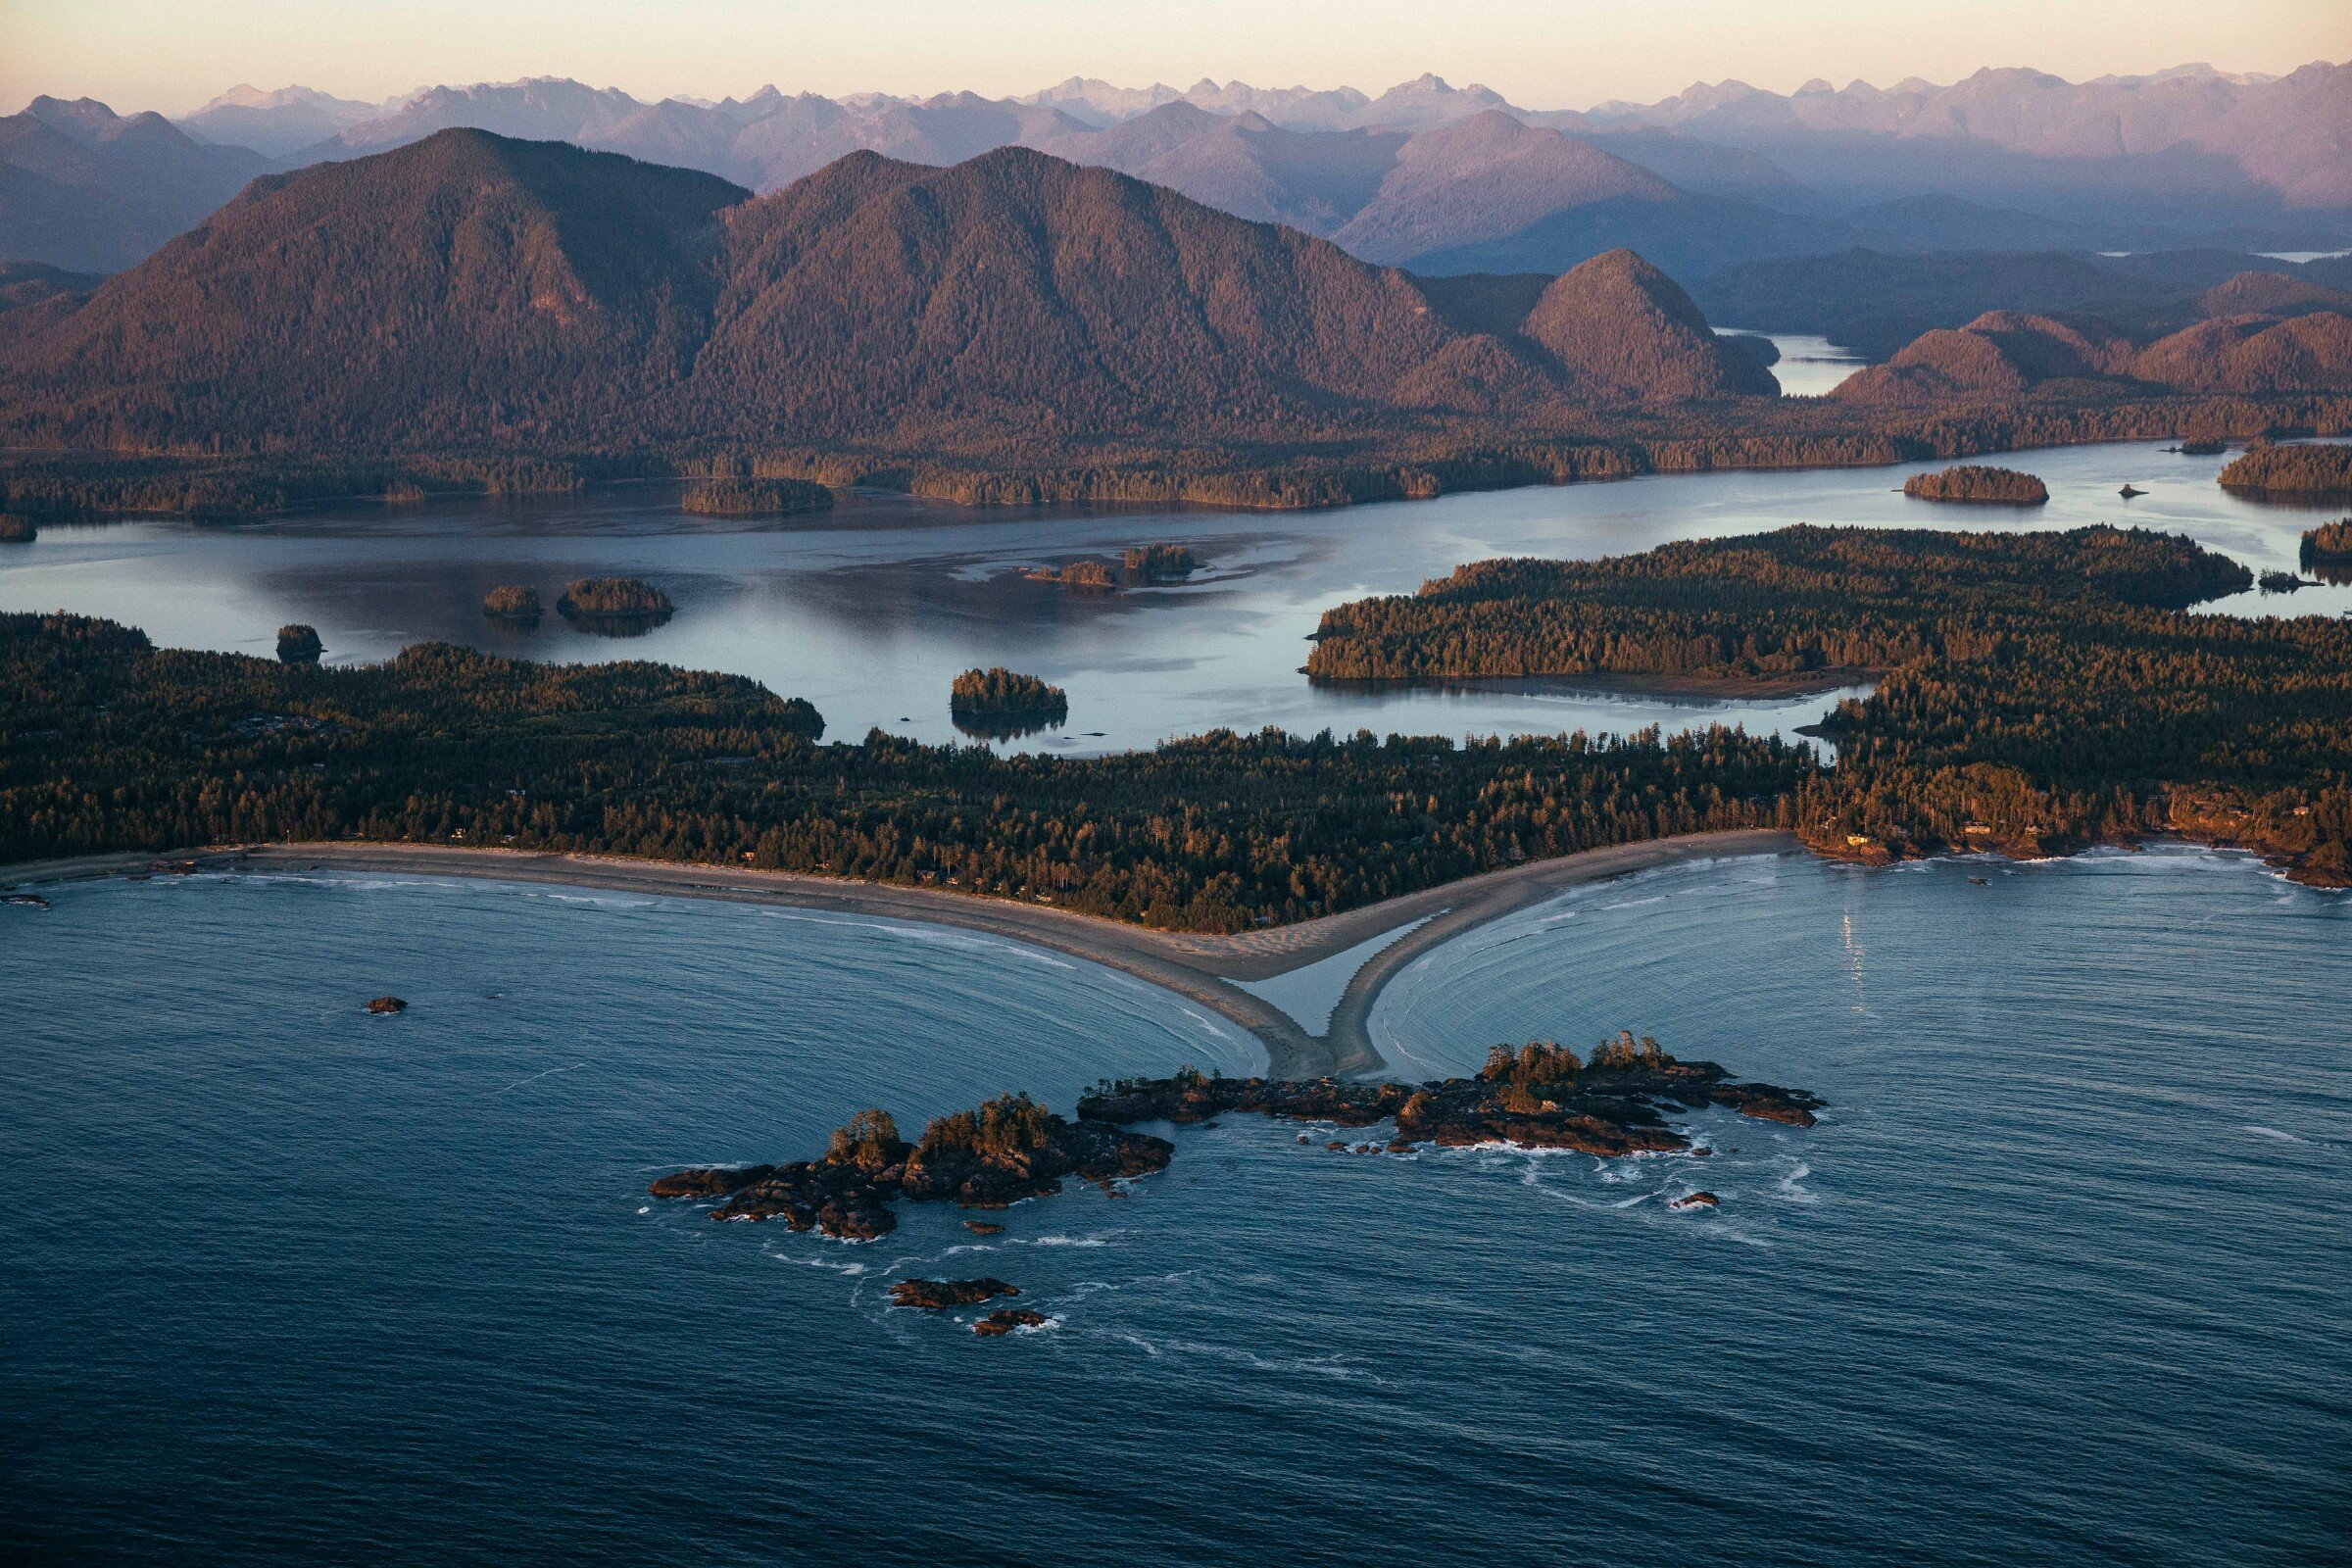 Aerial view of Clayoquot Sound's islands, ocean and mountains in the background